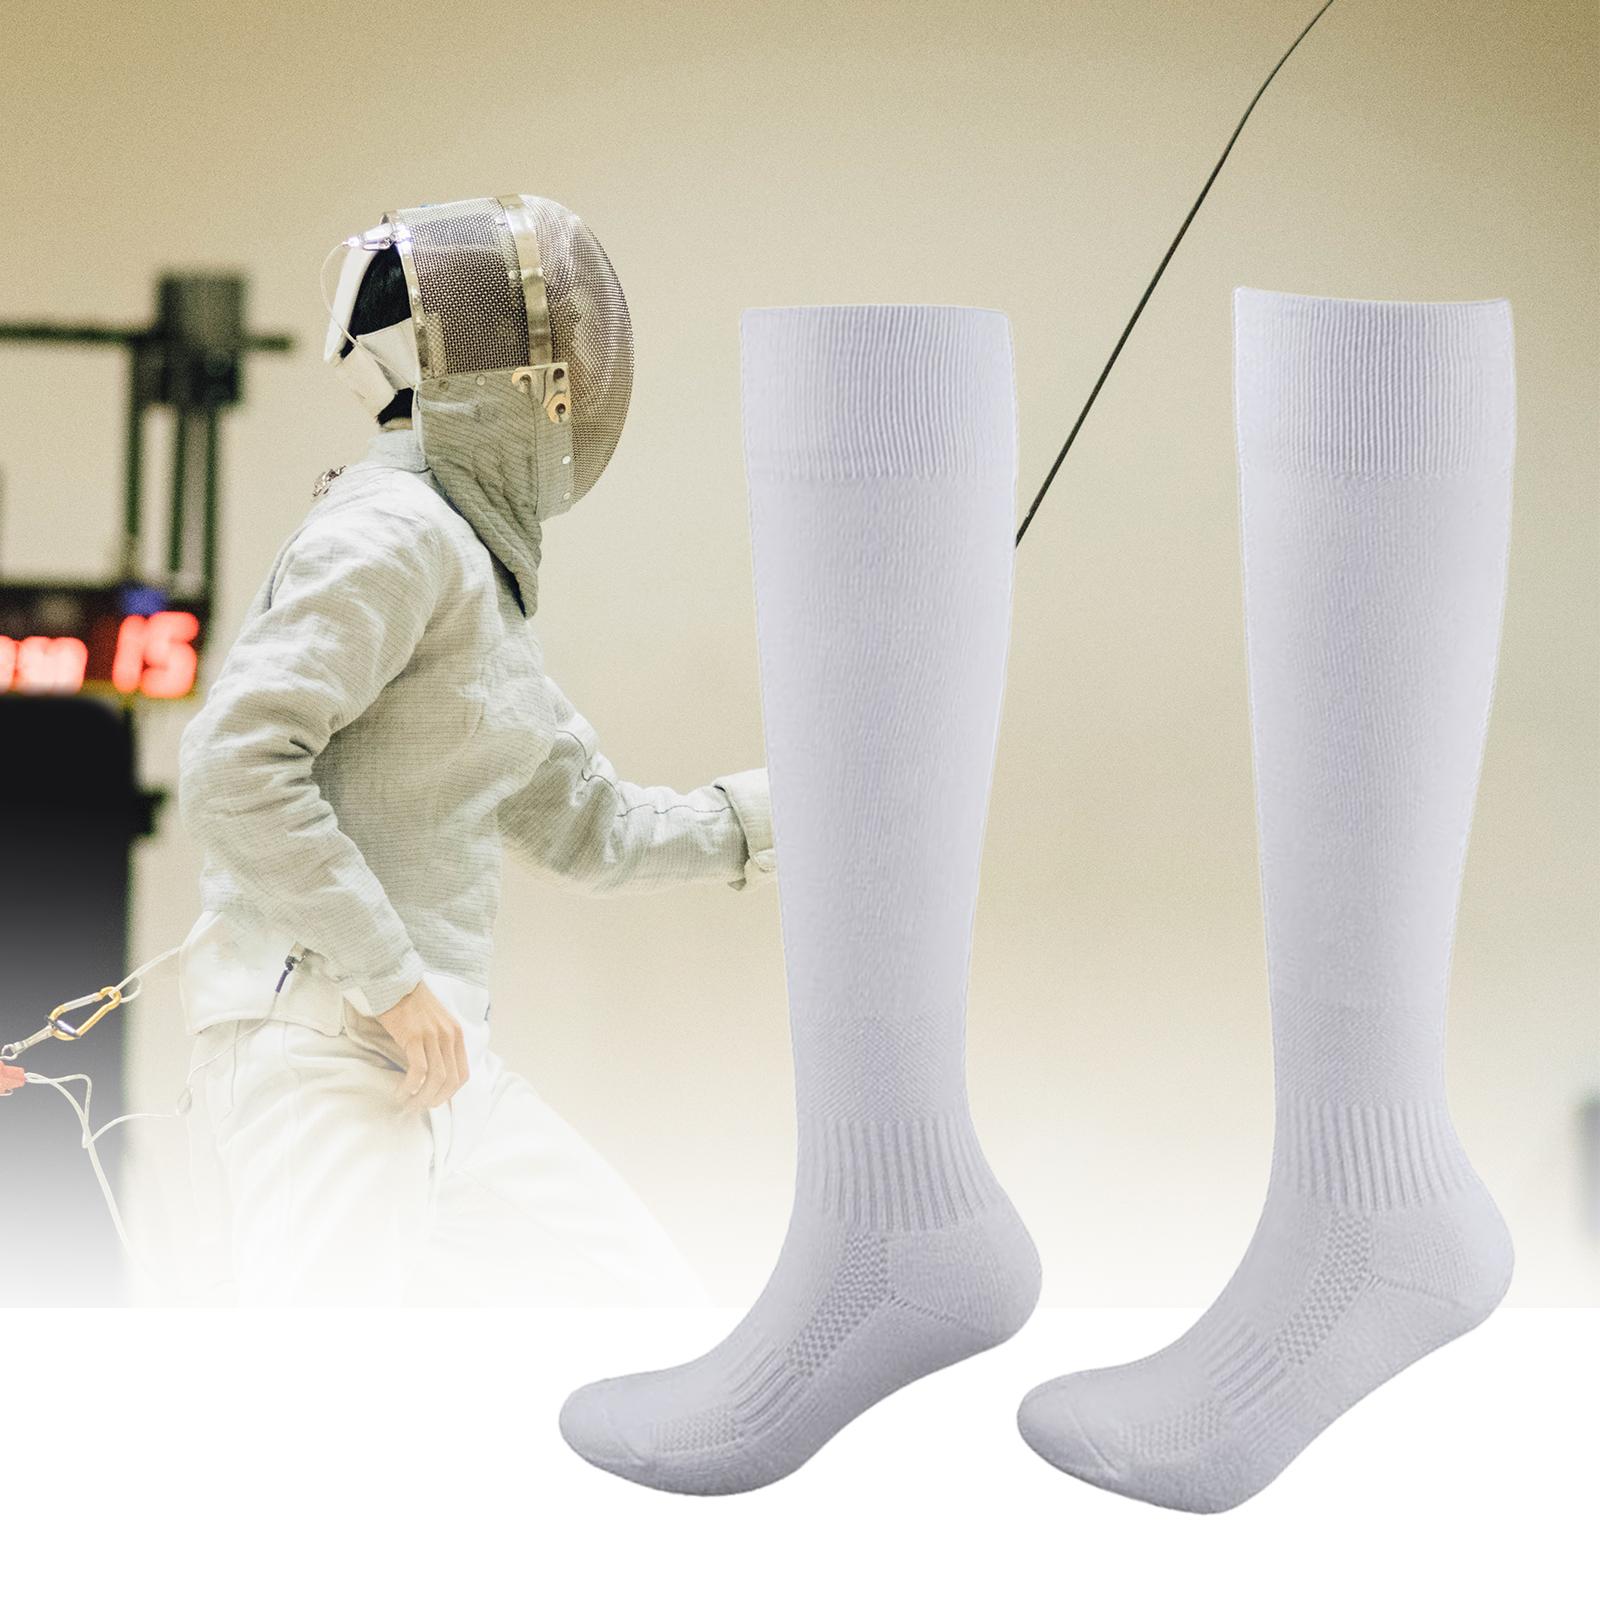 Fencing Socks Unisex Stretchy Unisex Fencing Stockings for Girls Adult XS White 